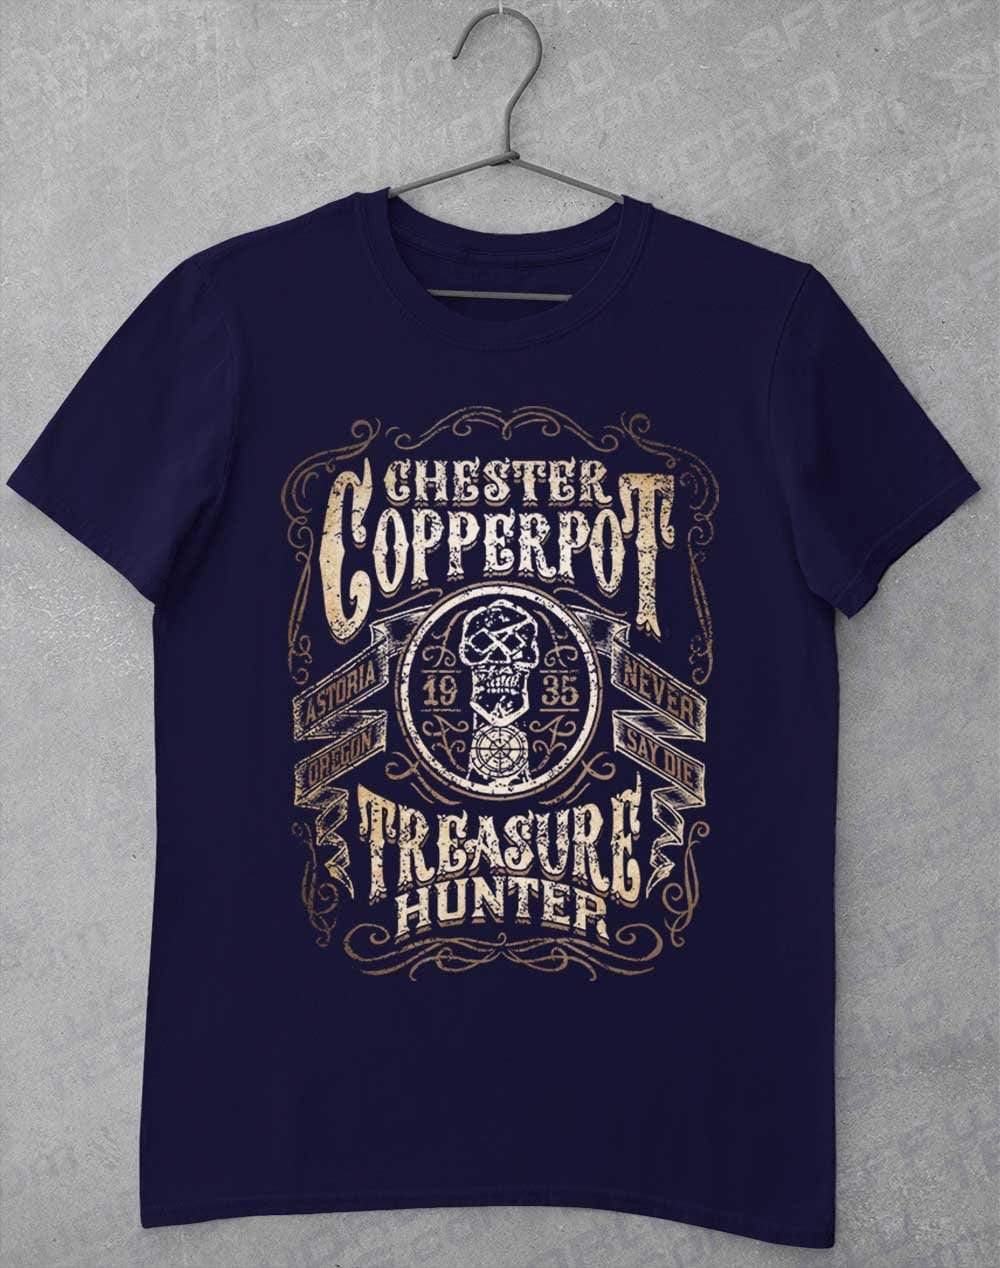 Chester Copperpot Treasure Hunter T-Shirt S / Navy  - Off World Tees